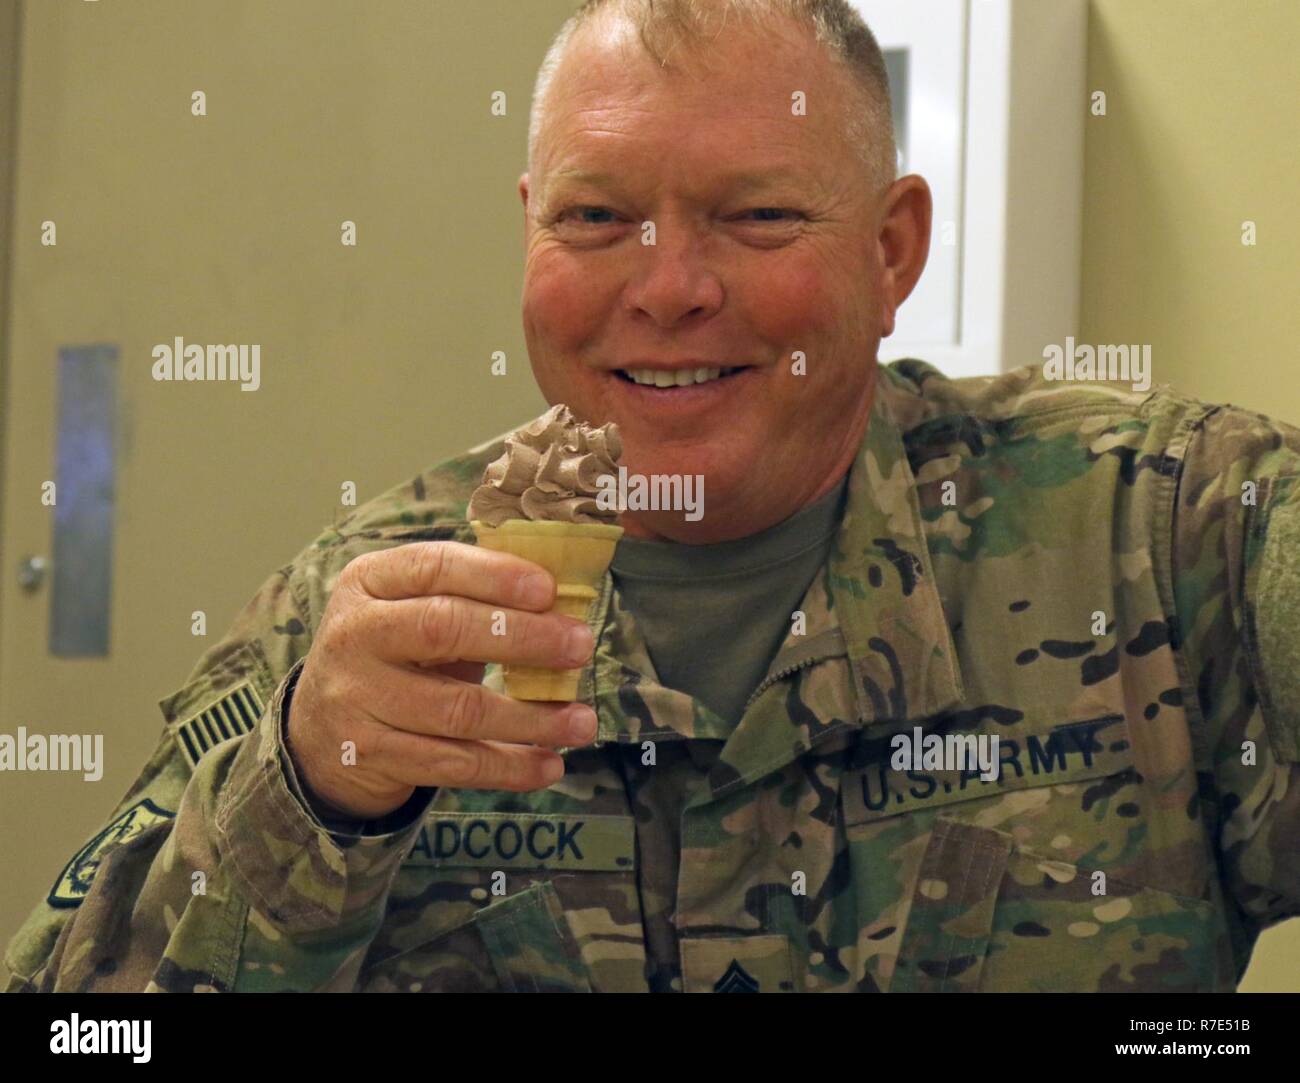 Sgt. 1st Class John Adcock, 184th Sustainment Command, enjoys an ice cream cone after his dinner at the dining facility December 1, 2018, at Fort Hood, Texas. The dining facility offers a variety of selections nightly, including a salad bar and an array of desserts. Stock Photo